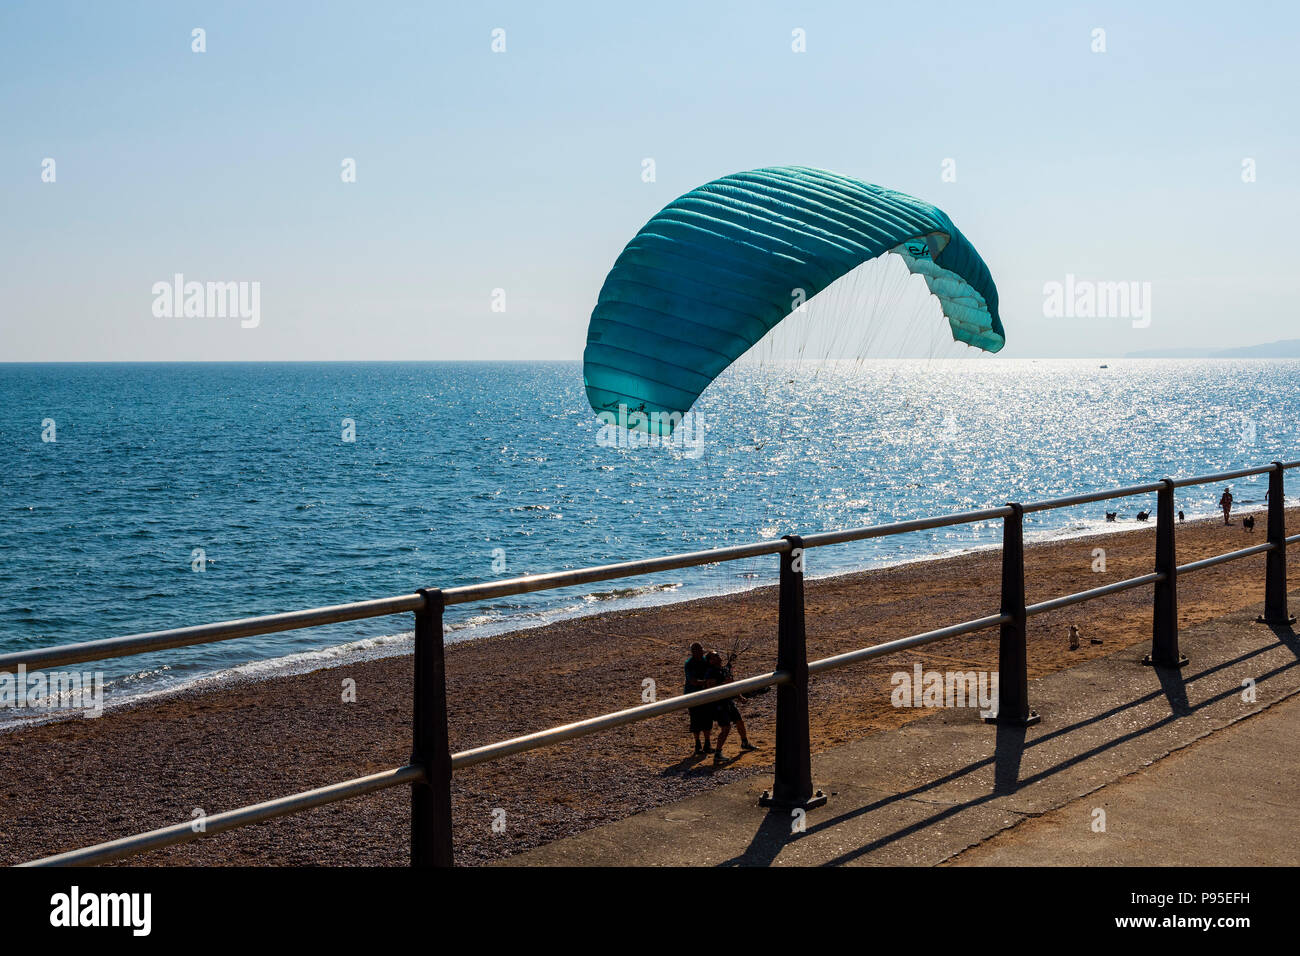 Paraglider having a lesson on the beach at West Bay, Dorset, UK. Stock Photo